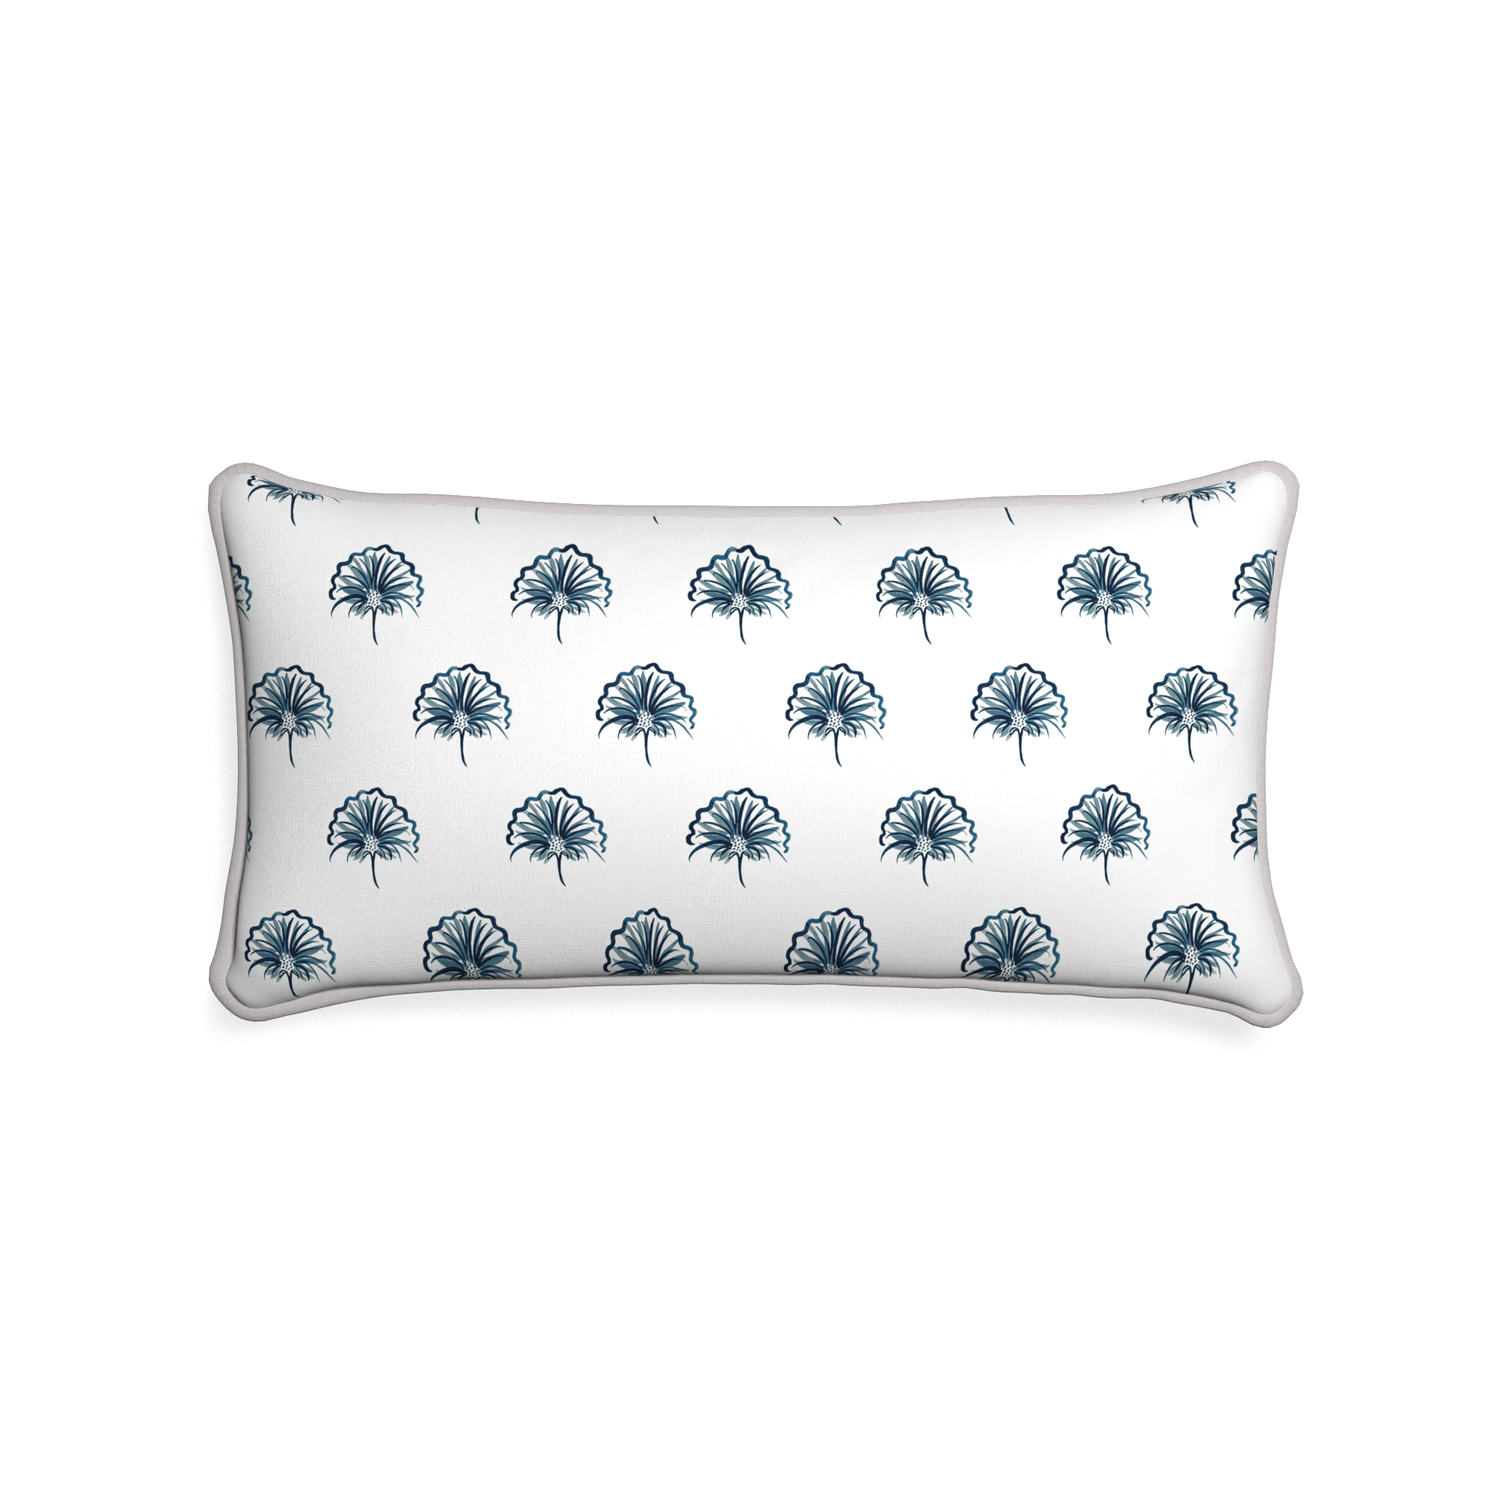 Midi-lumbar penelope midnight custom floral navypillow with pebble piping on white background